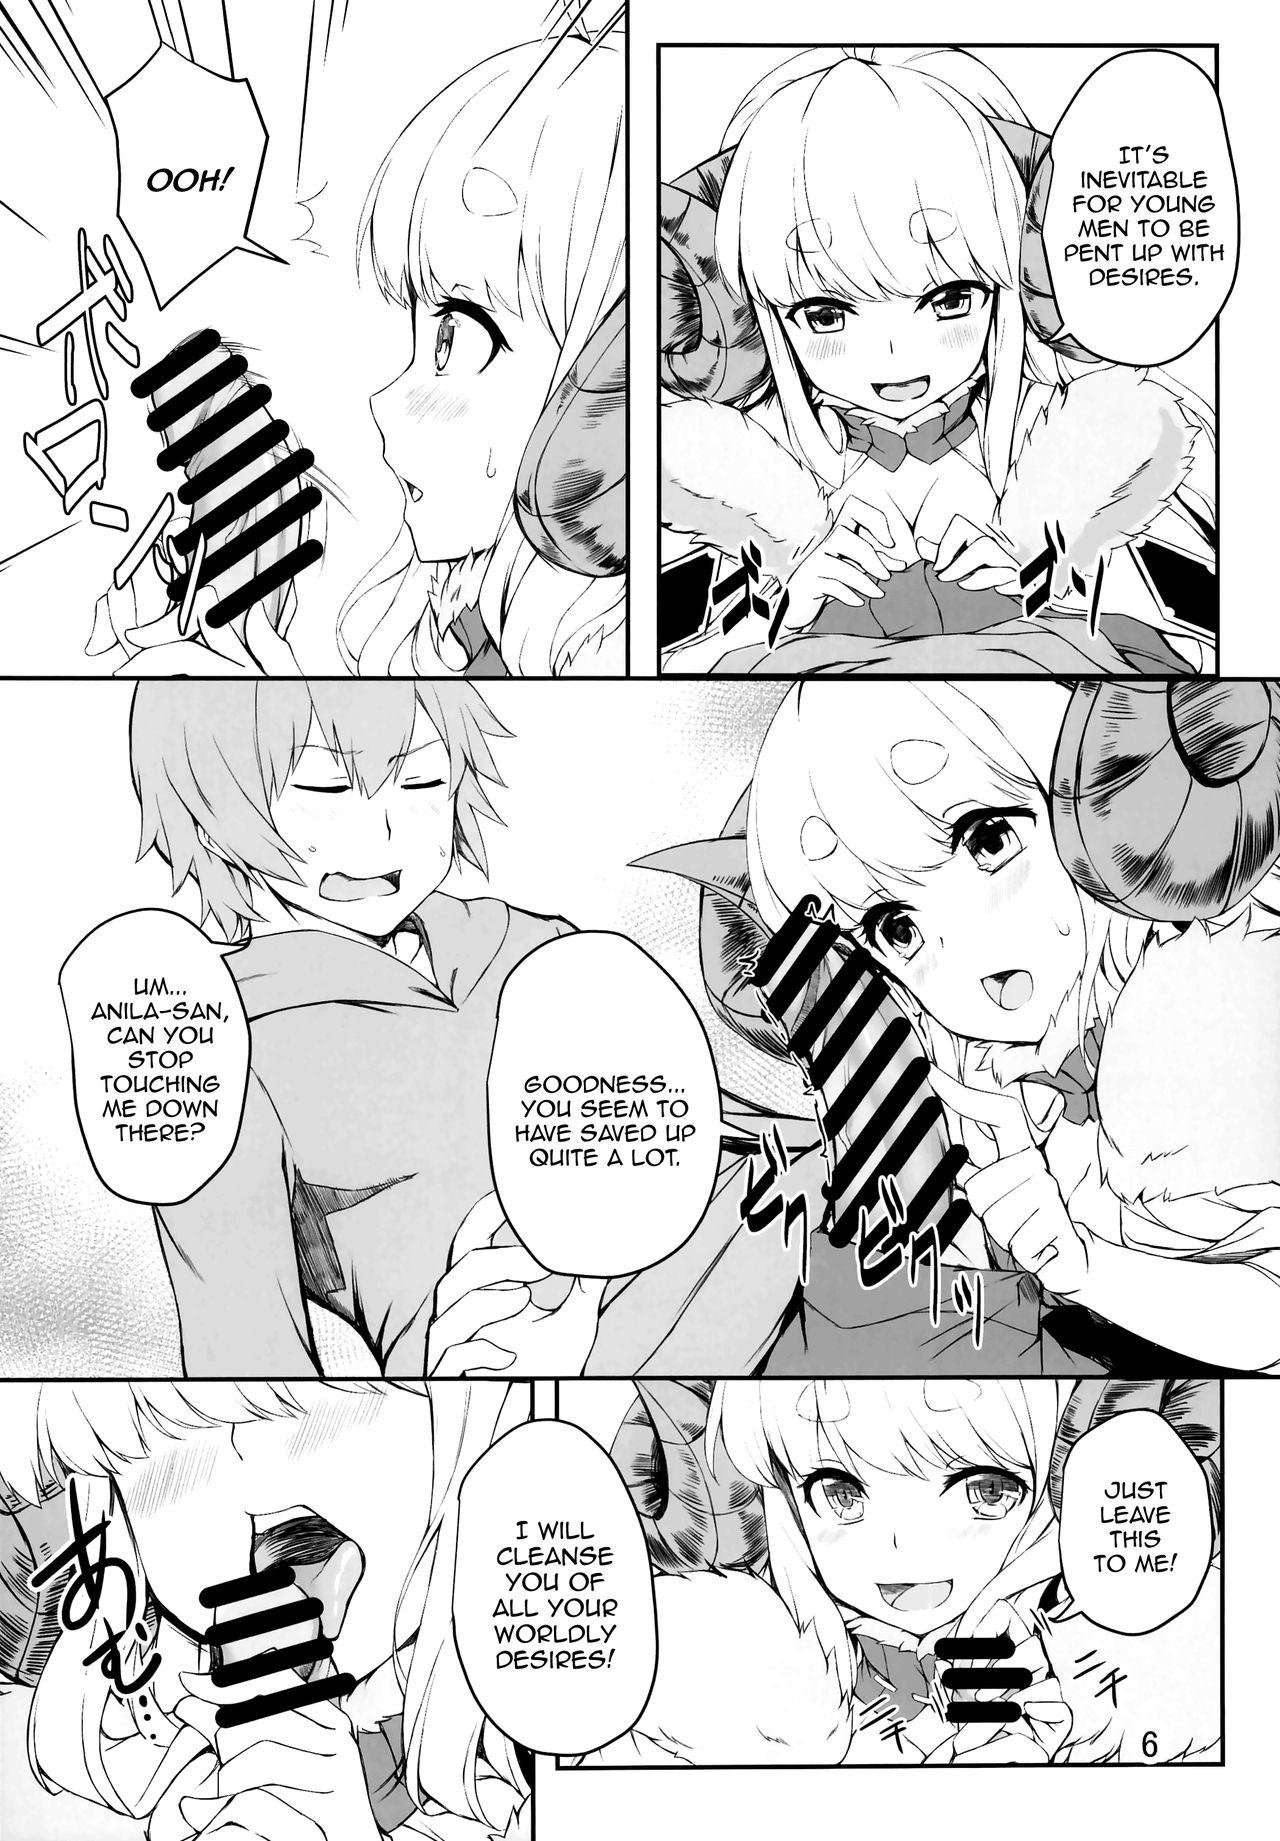 Cut Futari no Bonnou Hassan!! | Letting Out Their Desires!! - Granblue fantasy Pussy Fingering - Page 6